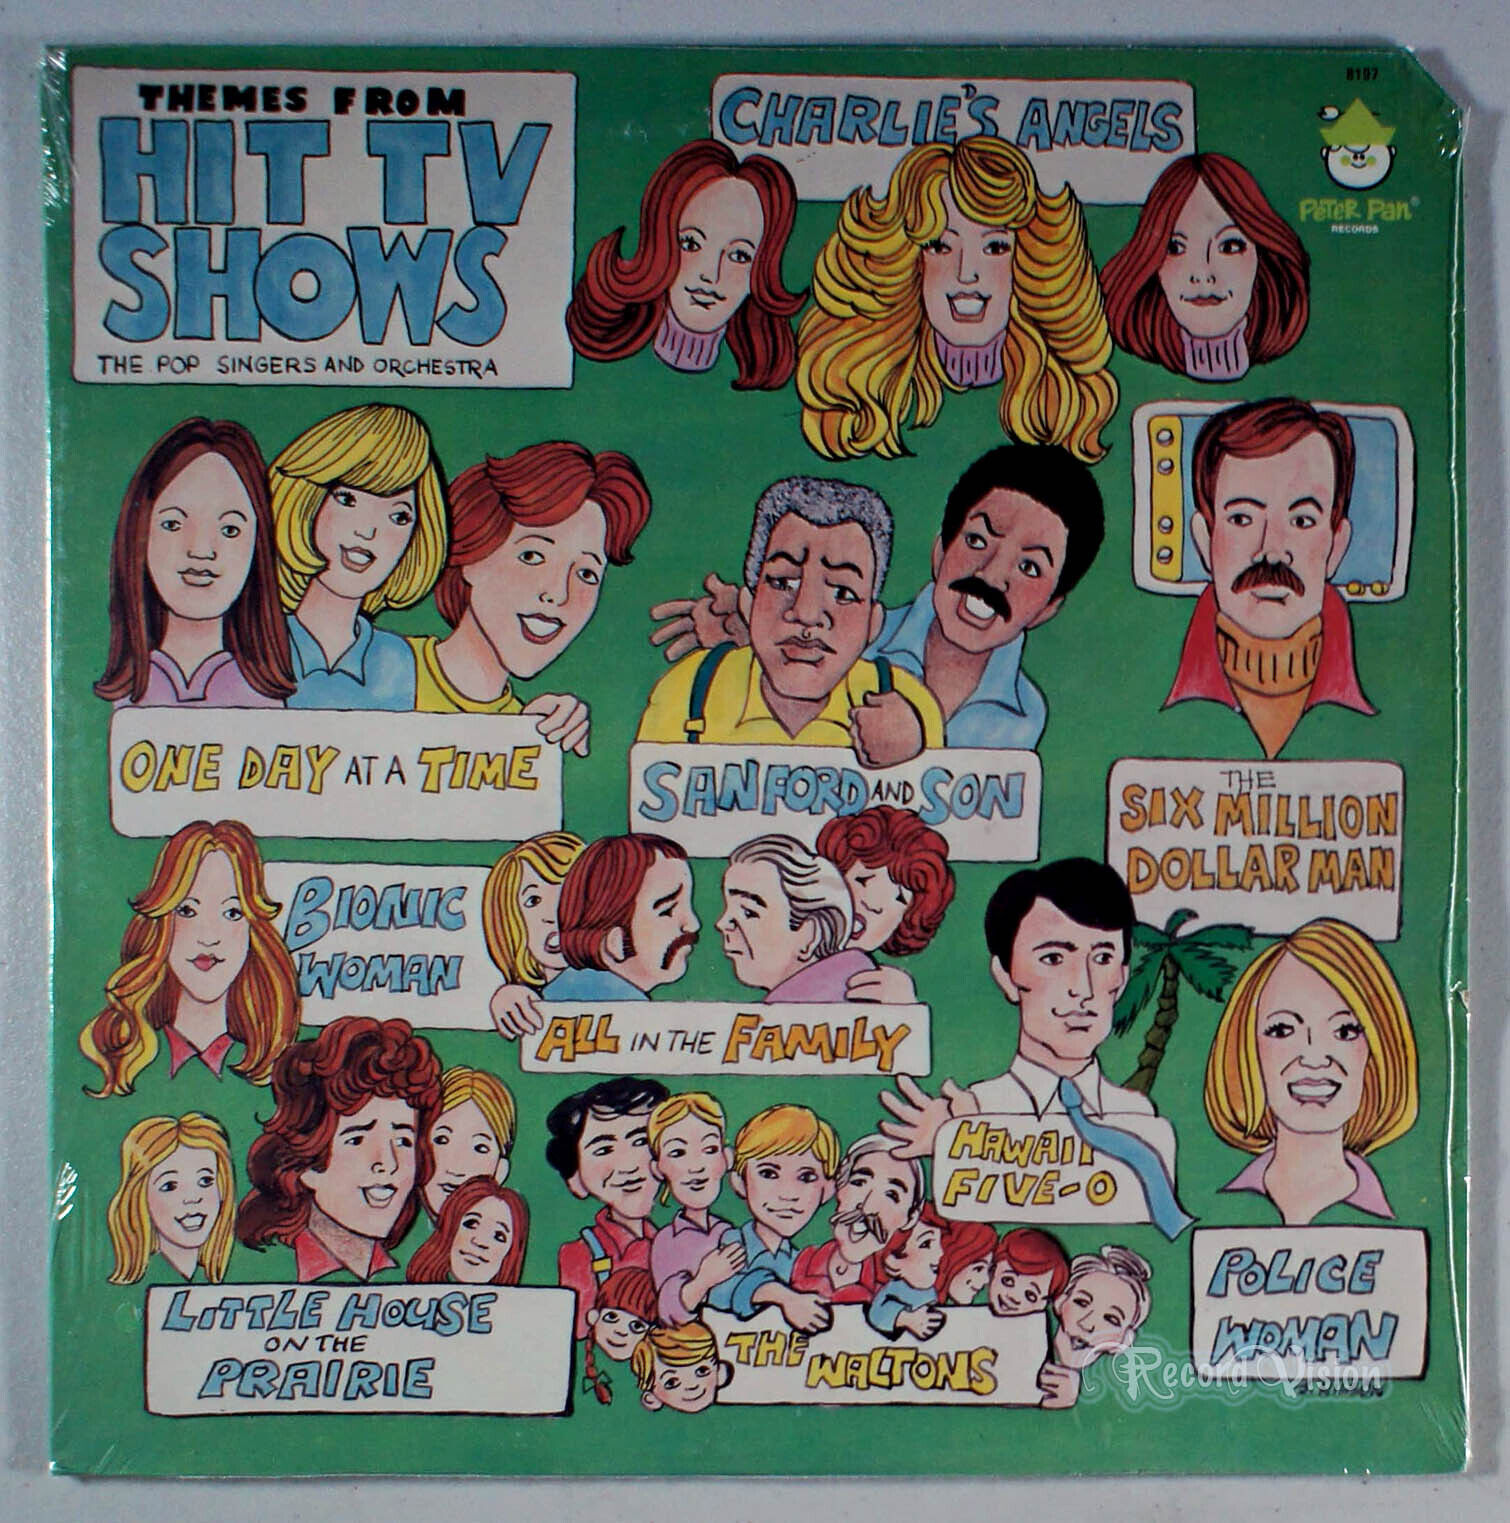 Peter Pan Records - Themes From Hit TV Shows Vol. 2 (1977) [SEALED] Vinyl LP • 